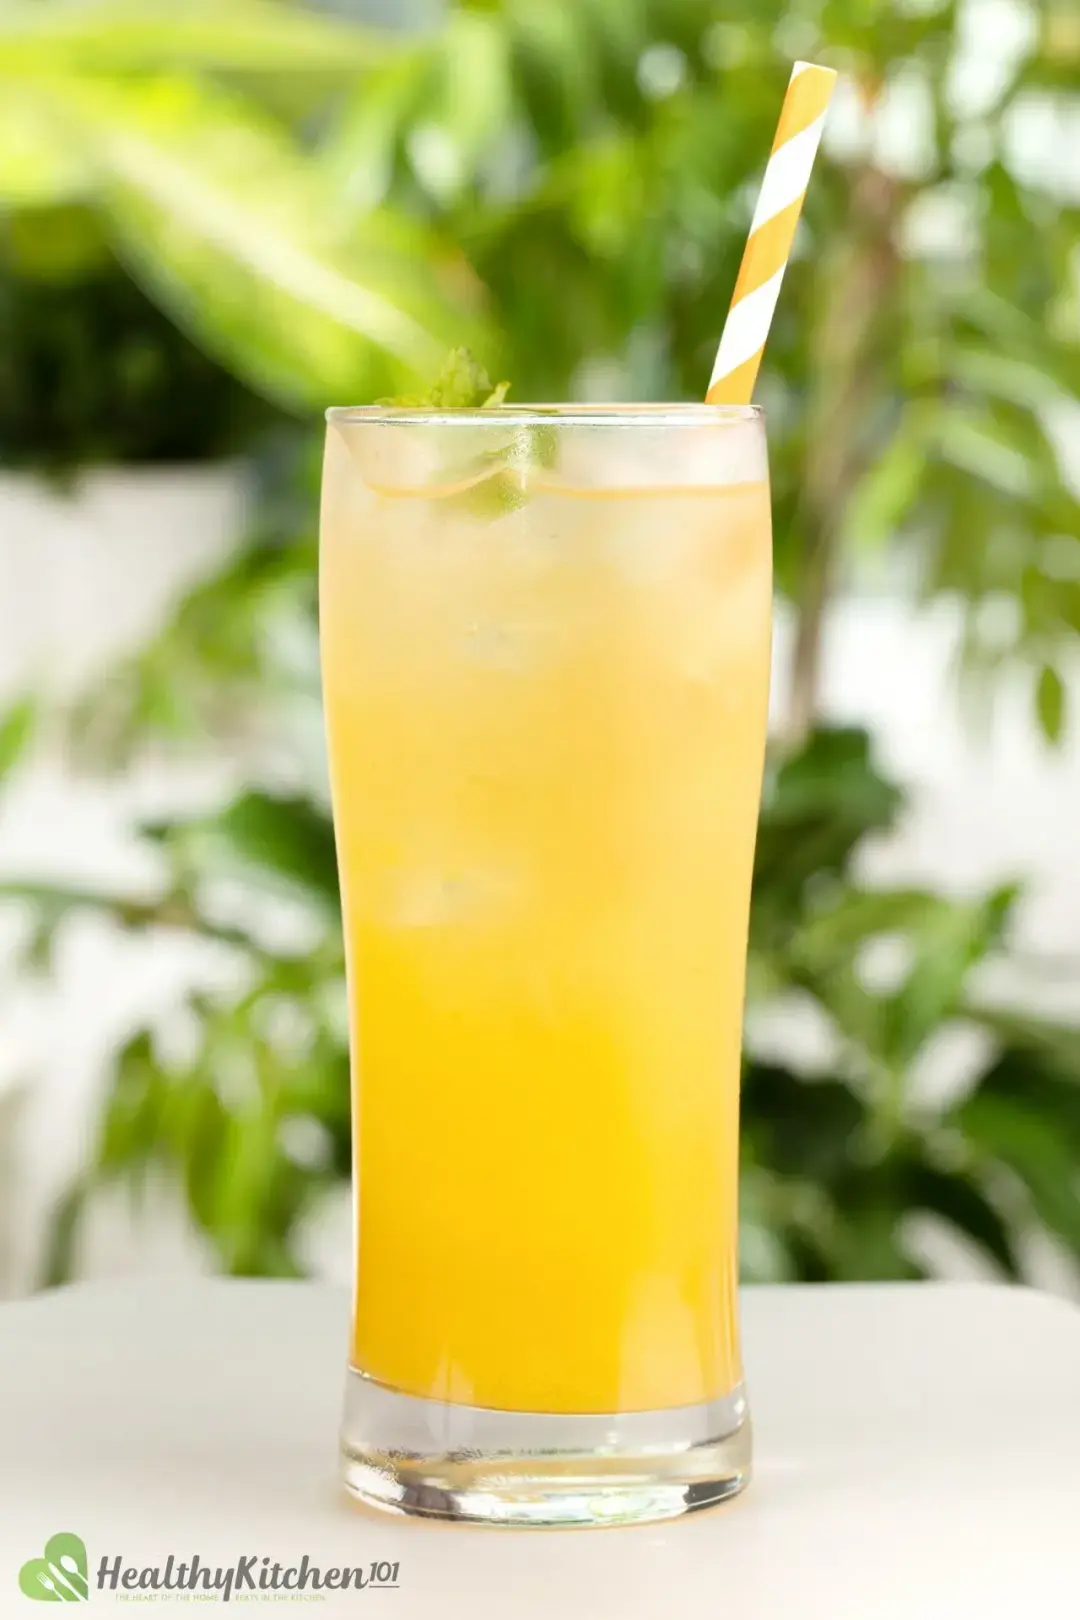 An iced tall glass of orange and ginger ale cocktail with a straw dunked in, in front of greeneries